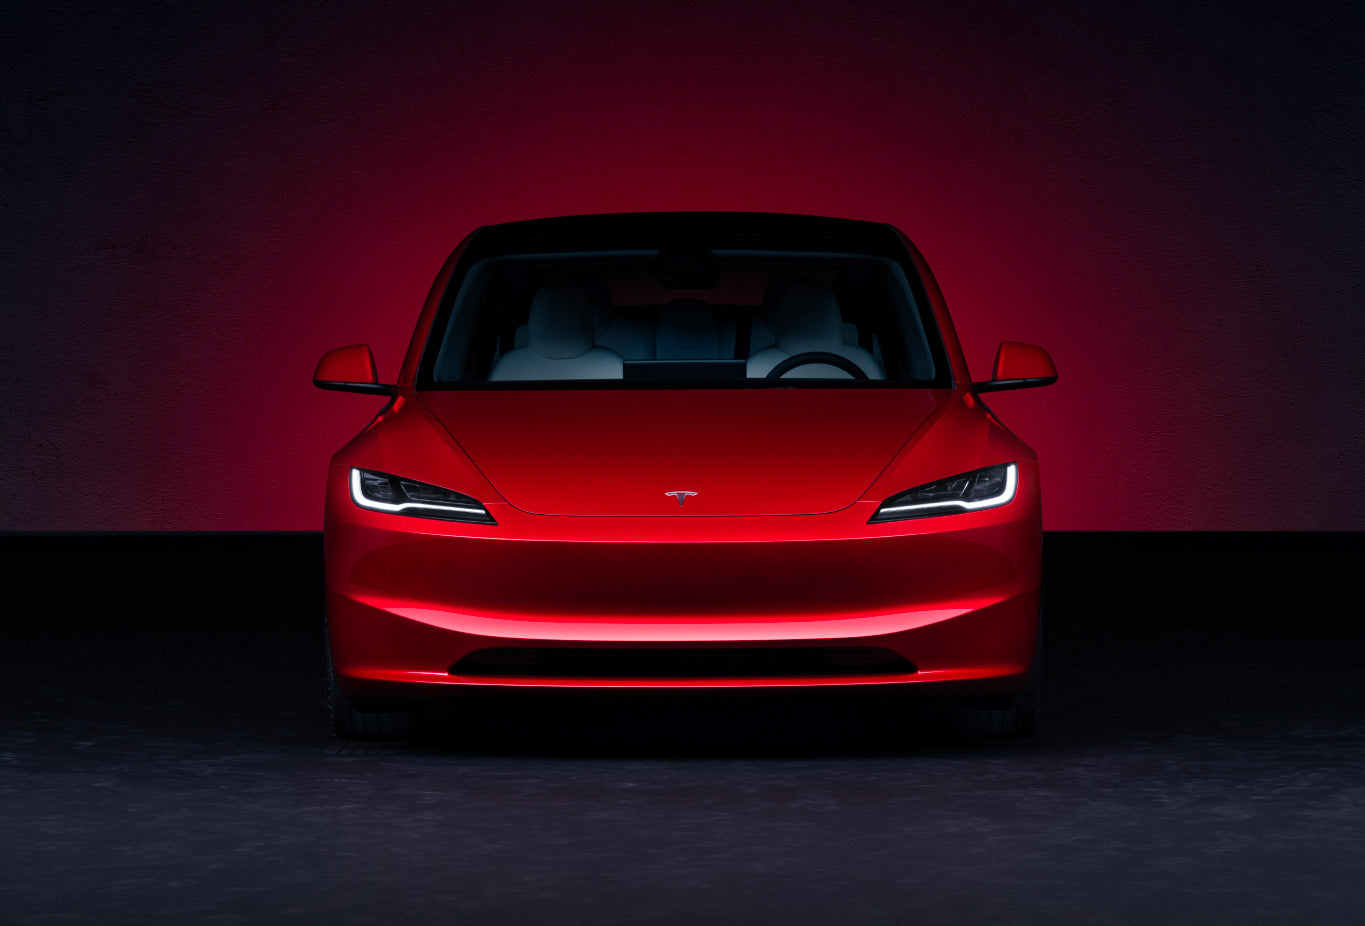 Tesla's Redesigned Highland Model 3 Now Available in the United